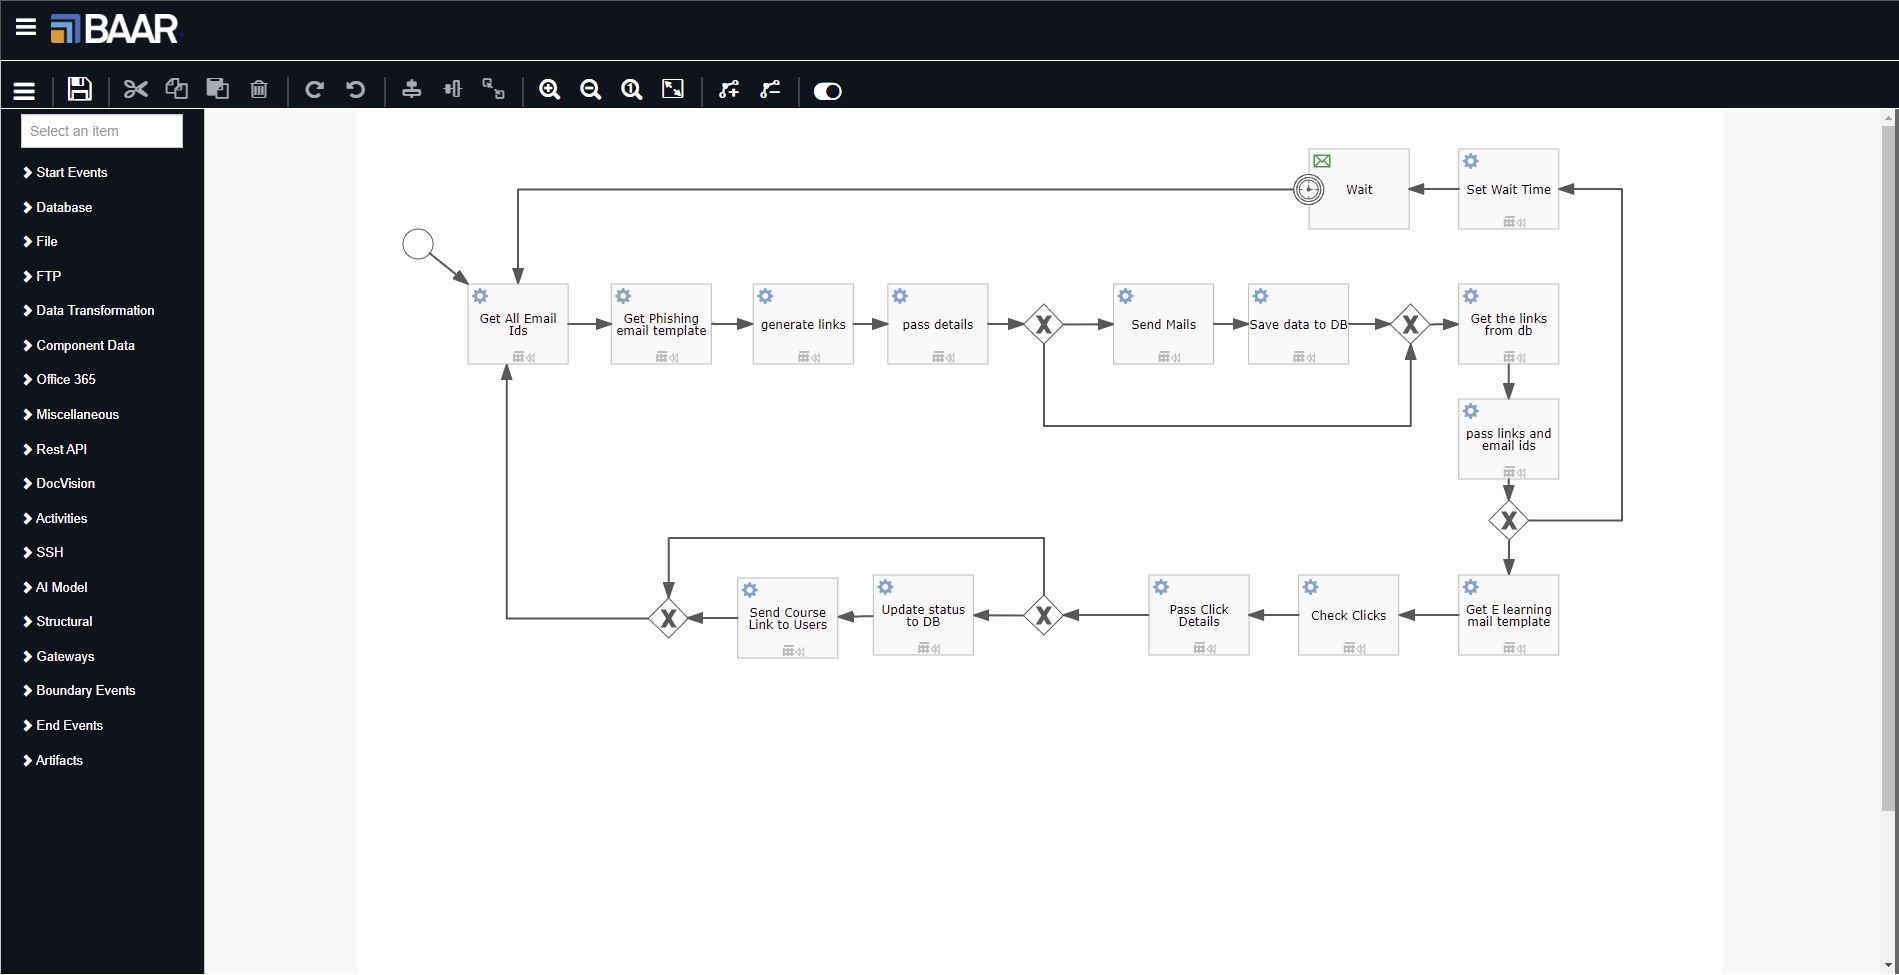 Drag and drop workflow creation. These workflows have application development tasks, like reading from data bases, data transformation, use of AI and a lot more. The power of integration with unlimited data sources has been made simple and quick.